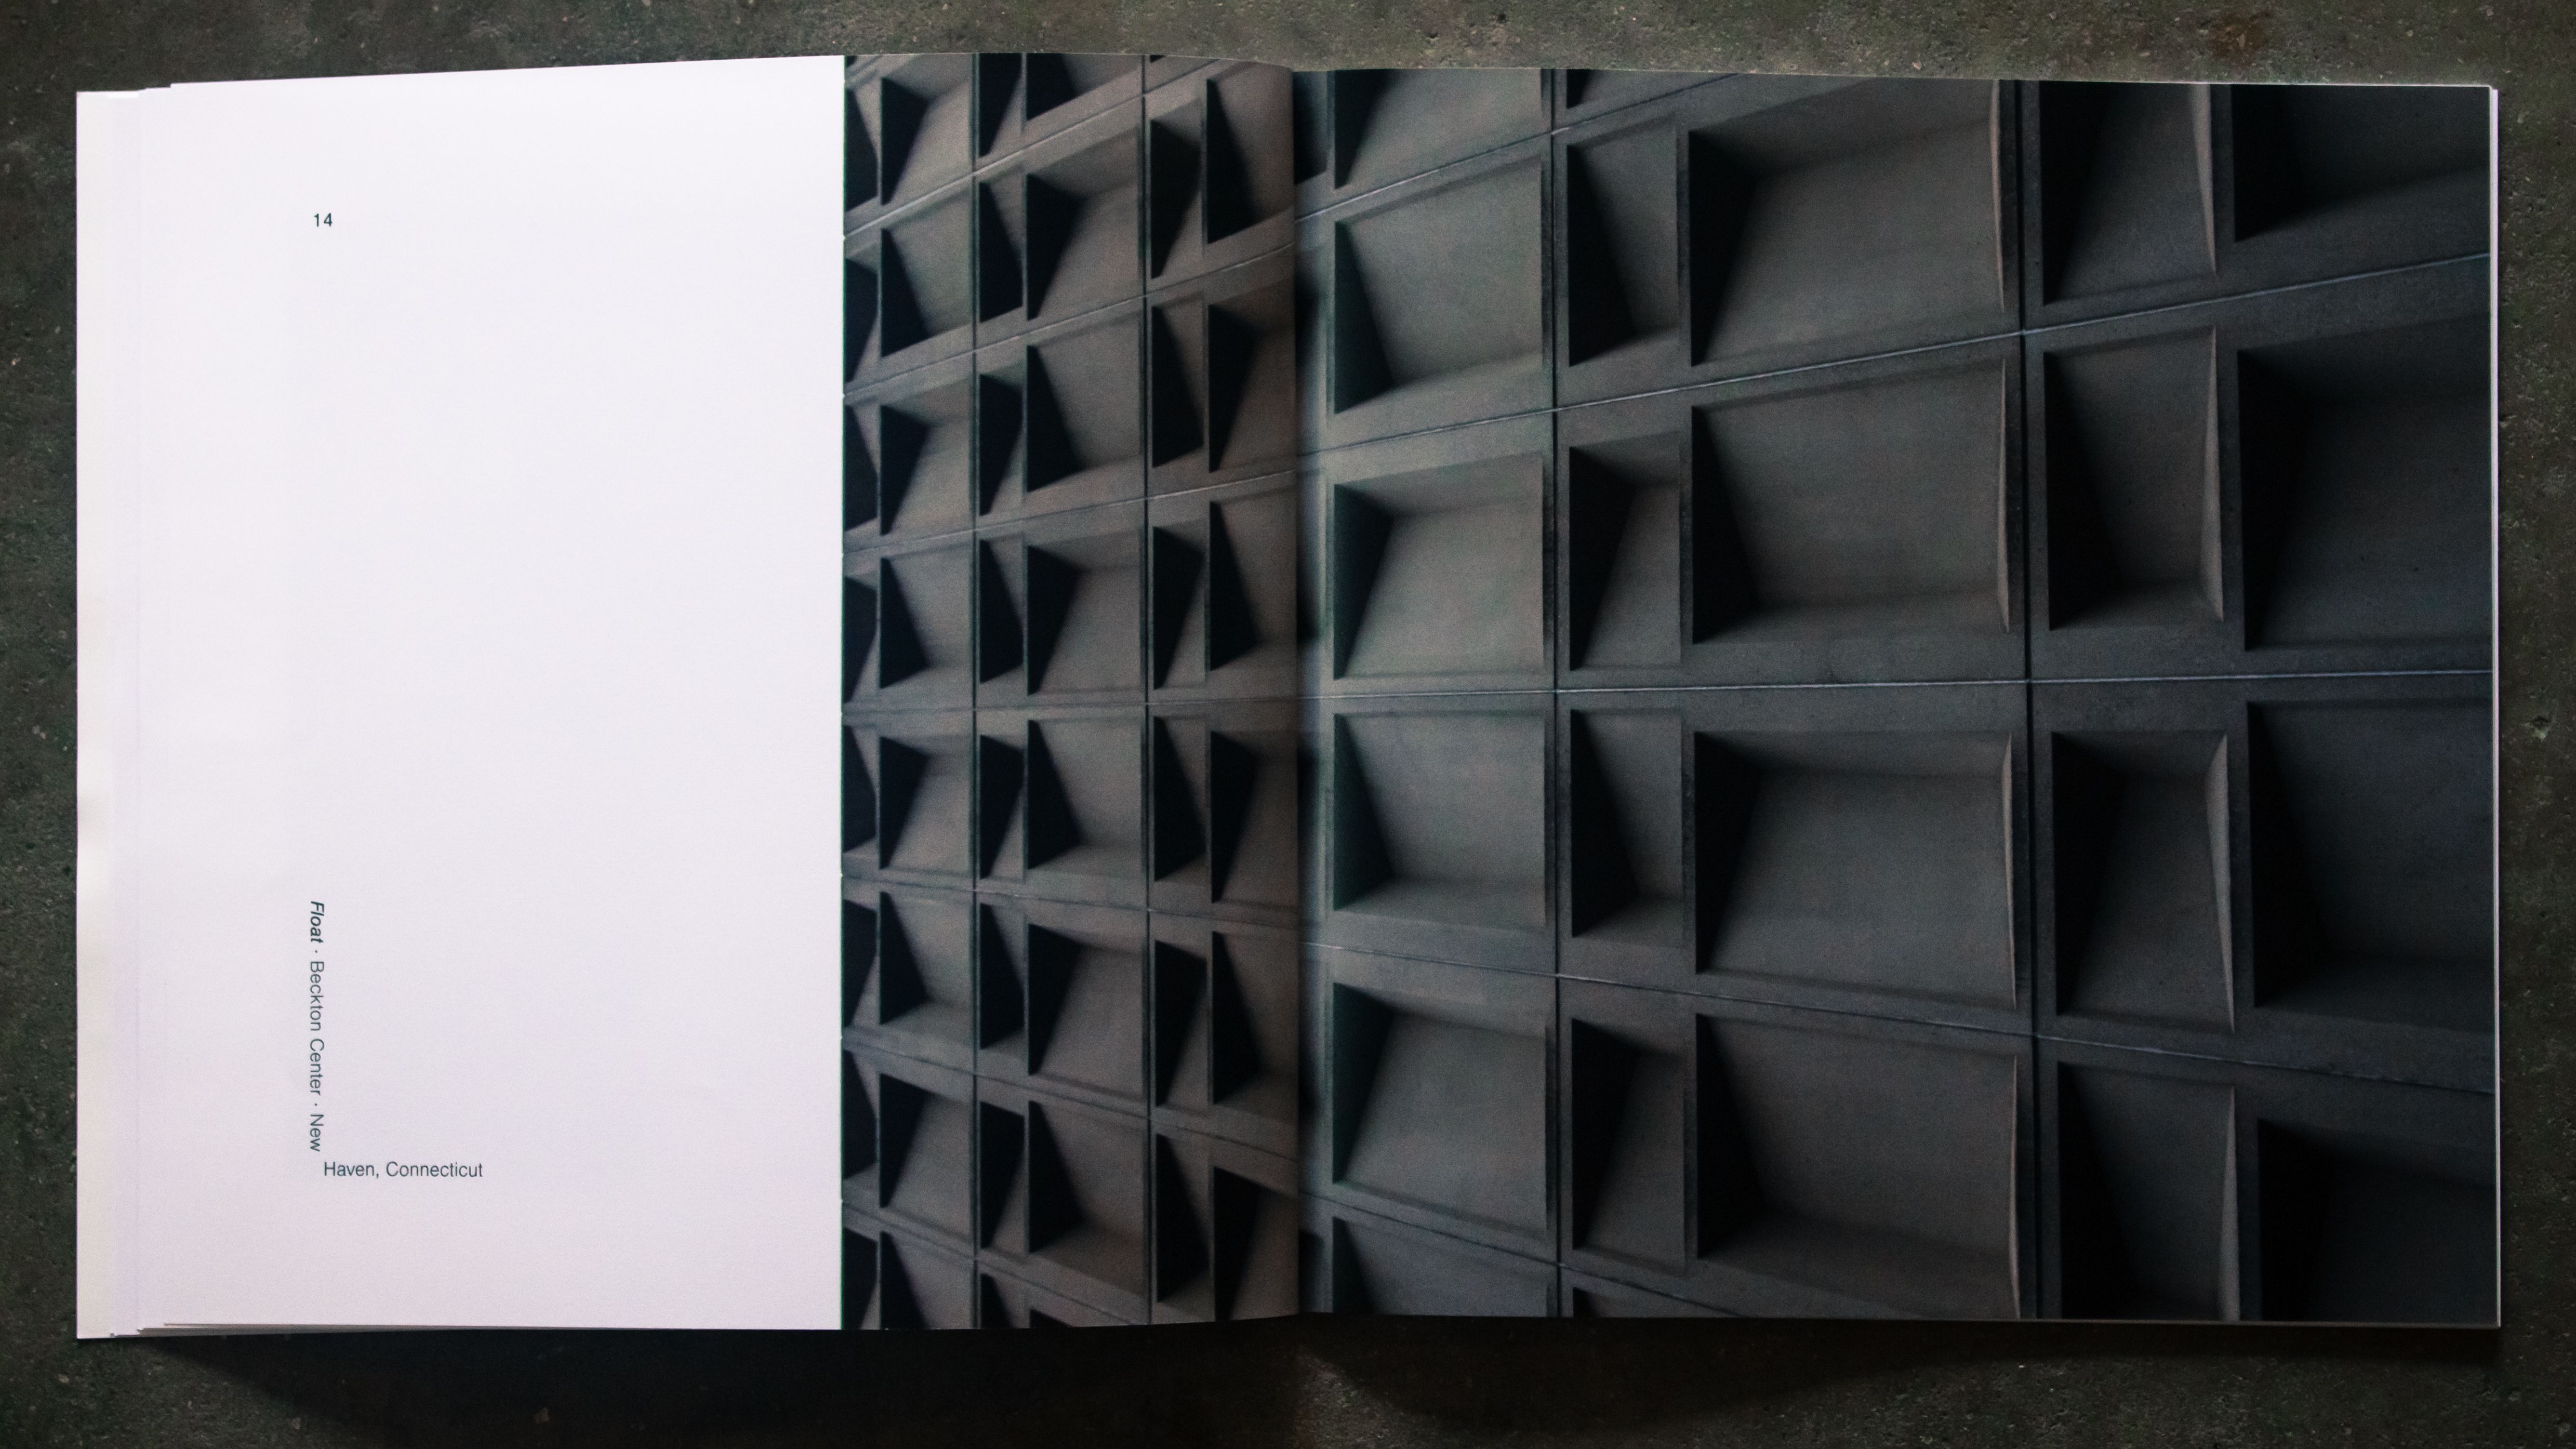 Pages from UP showing an architectural photo of a minimalist concrete building.